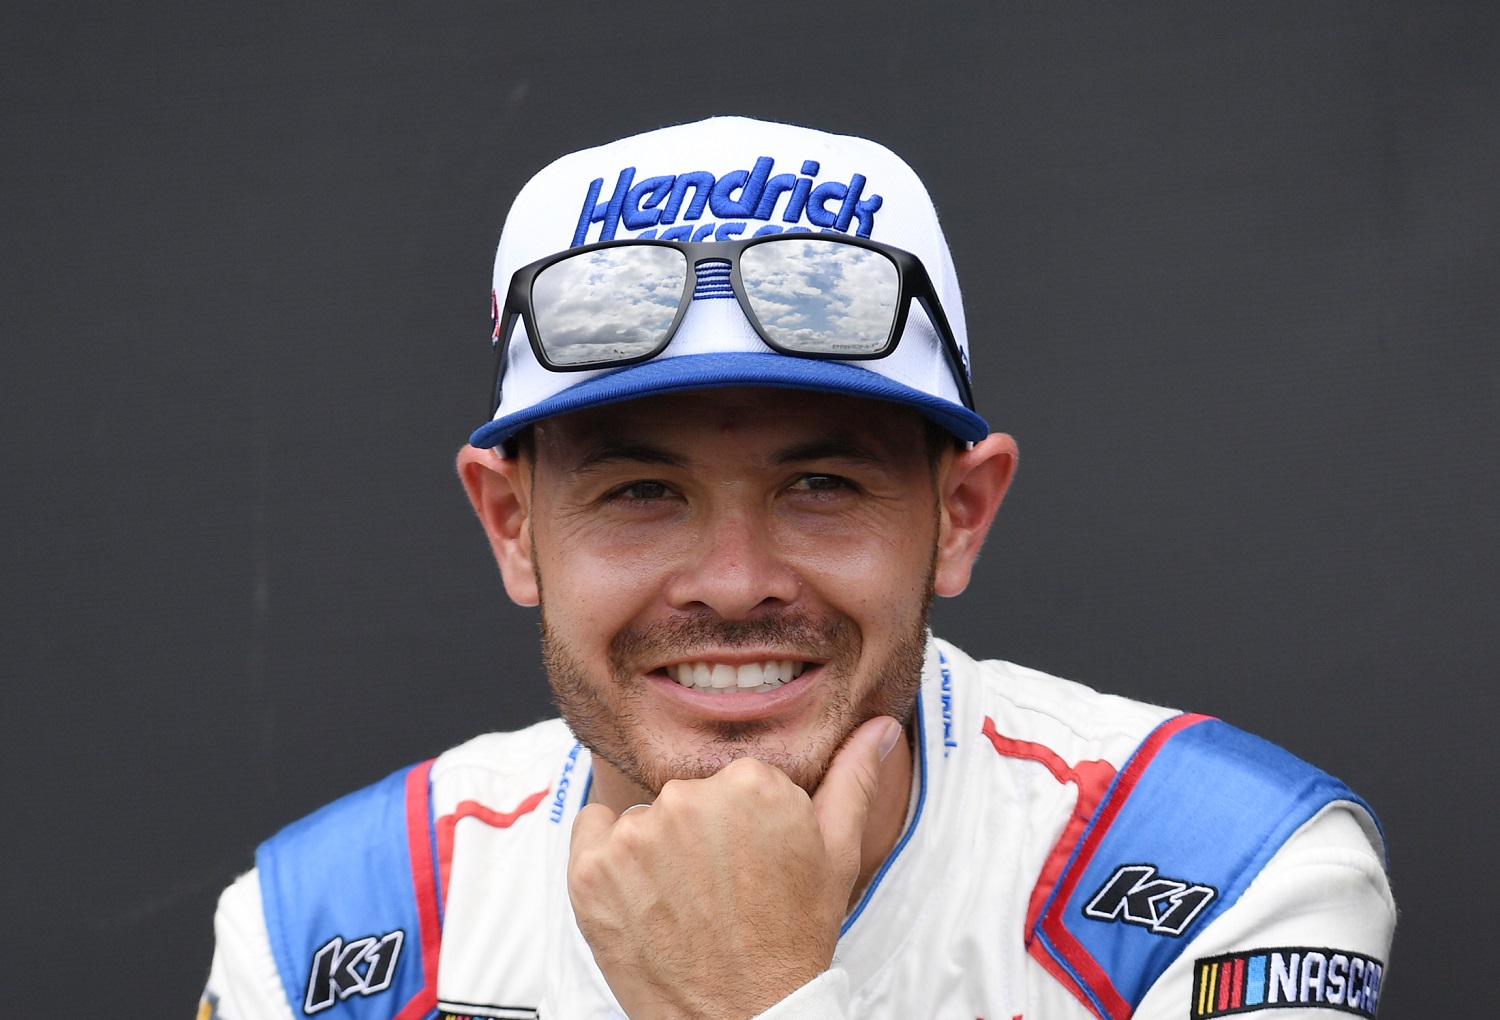 Kyle Larson looks on during pre-race activities before the running of the NASCAR Cup Series Quaker State 400 on July 9, 2022, at Atlanta Motor Speedway.